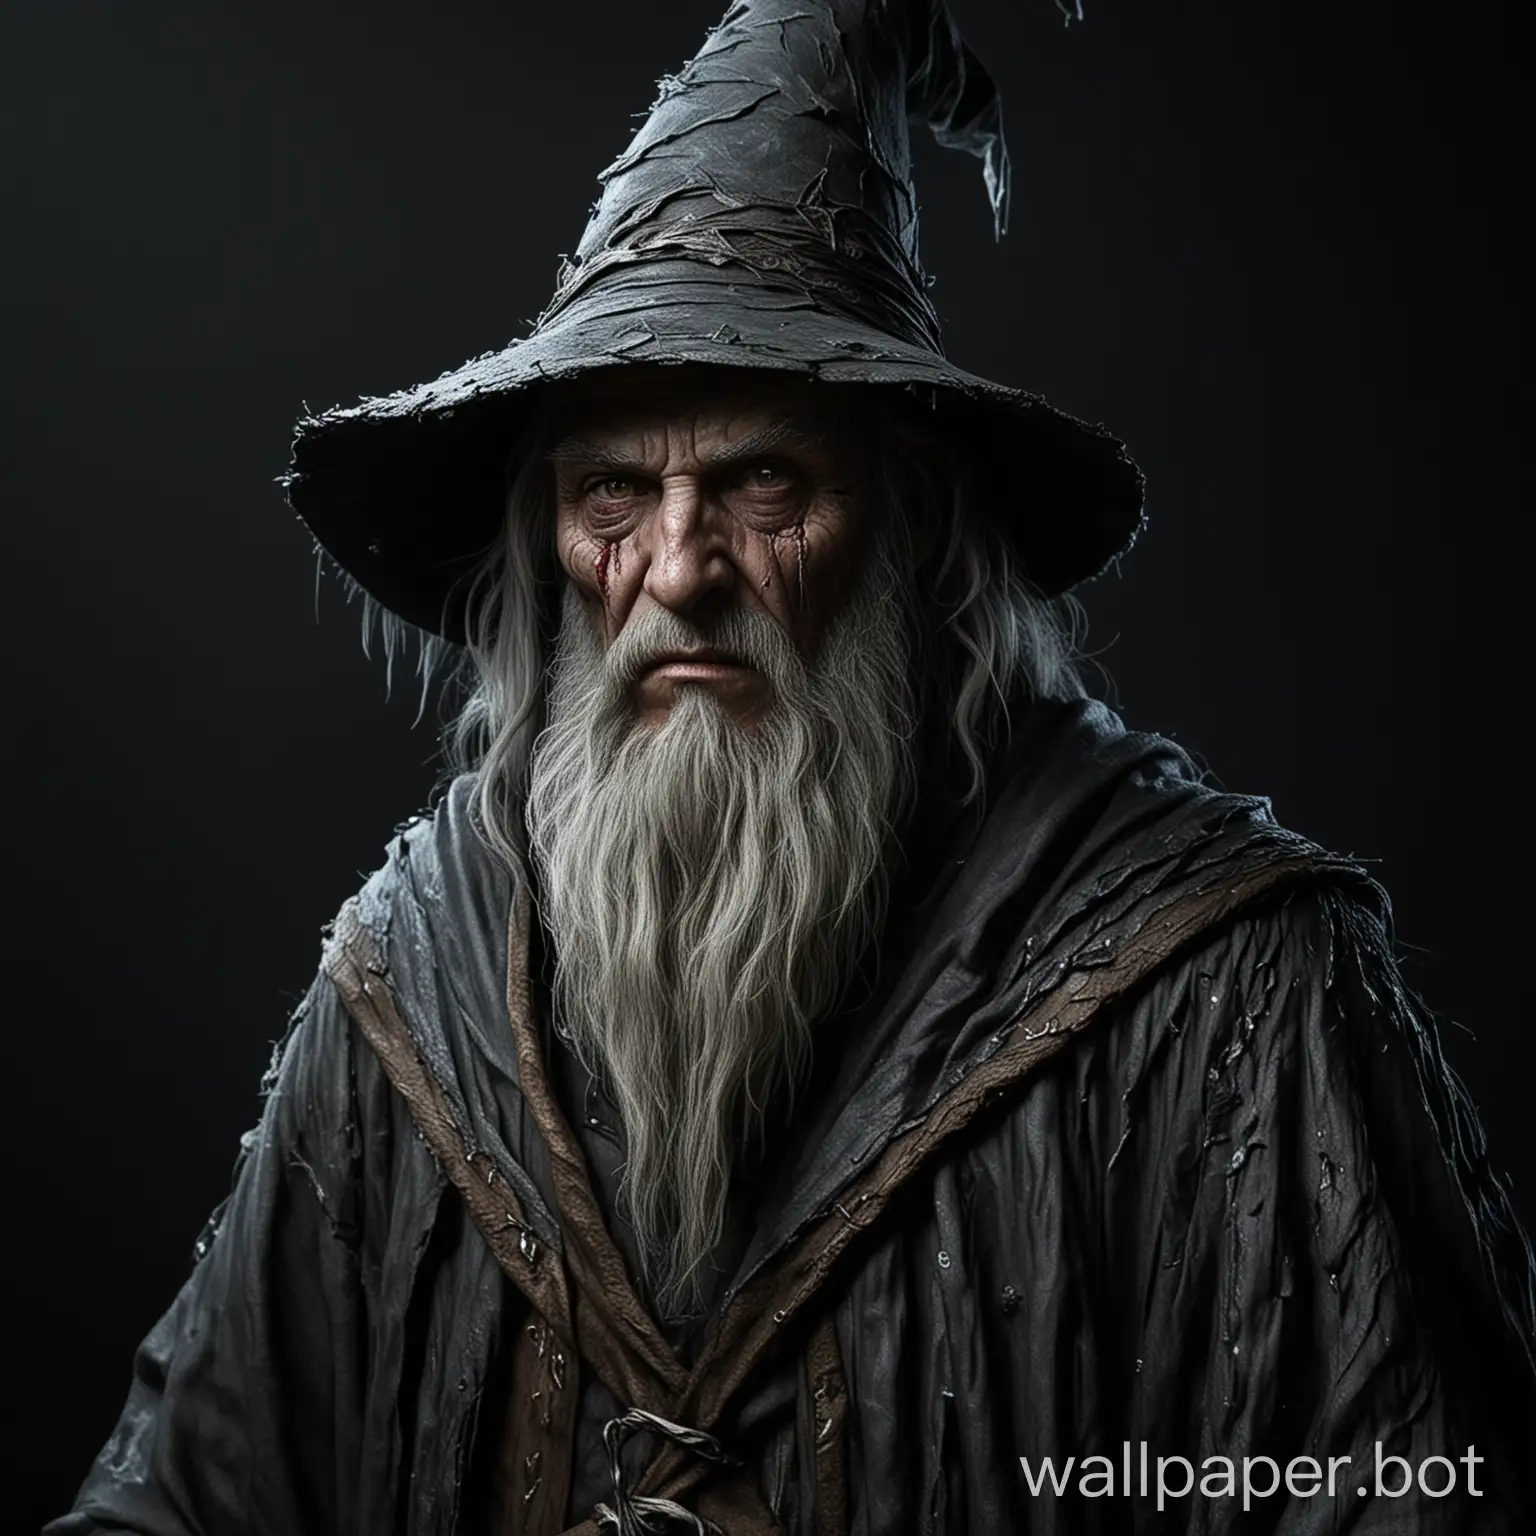 Draw a fantasy very weak, scarred wizard on a black background